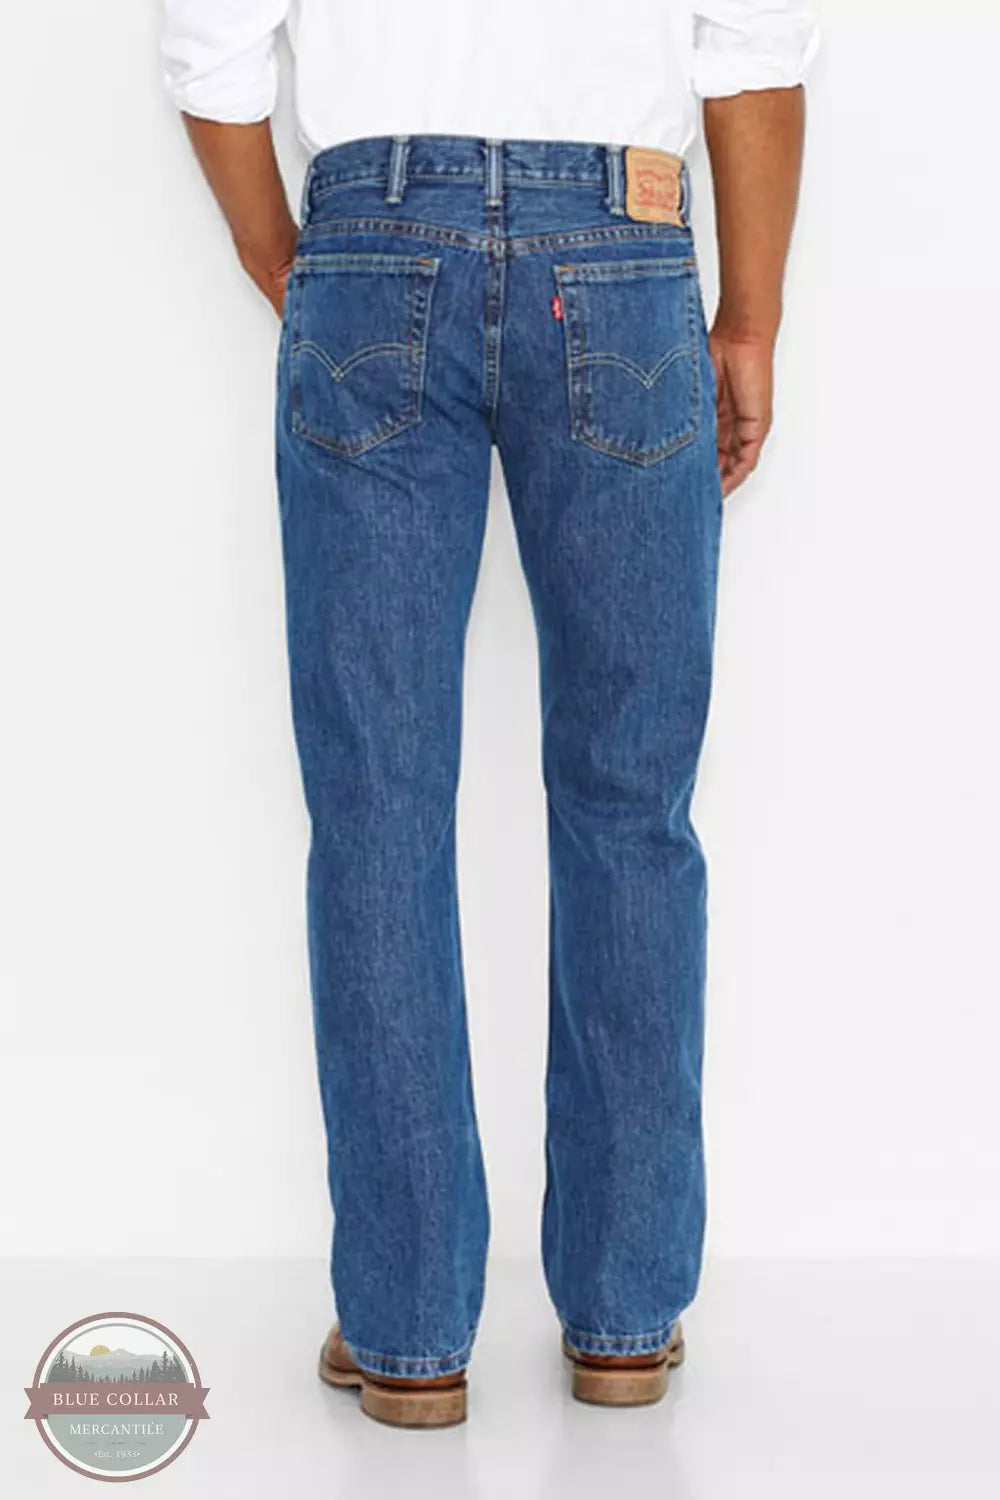 Levi's 517-4891 517 Bootcut Jeans in Medium Stonewash Back View